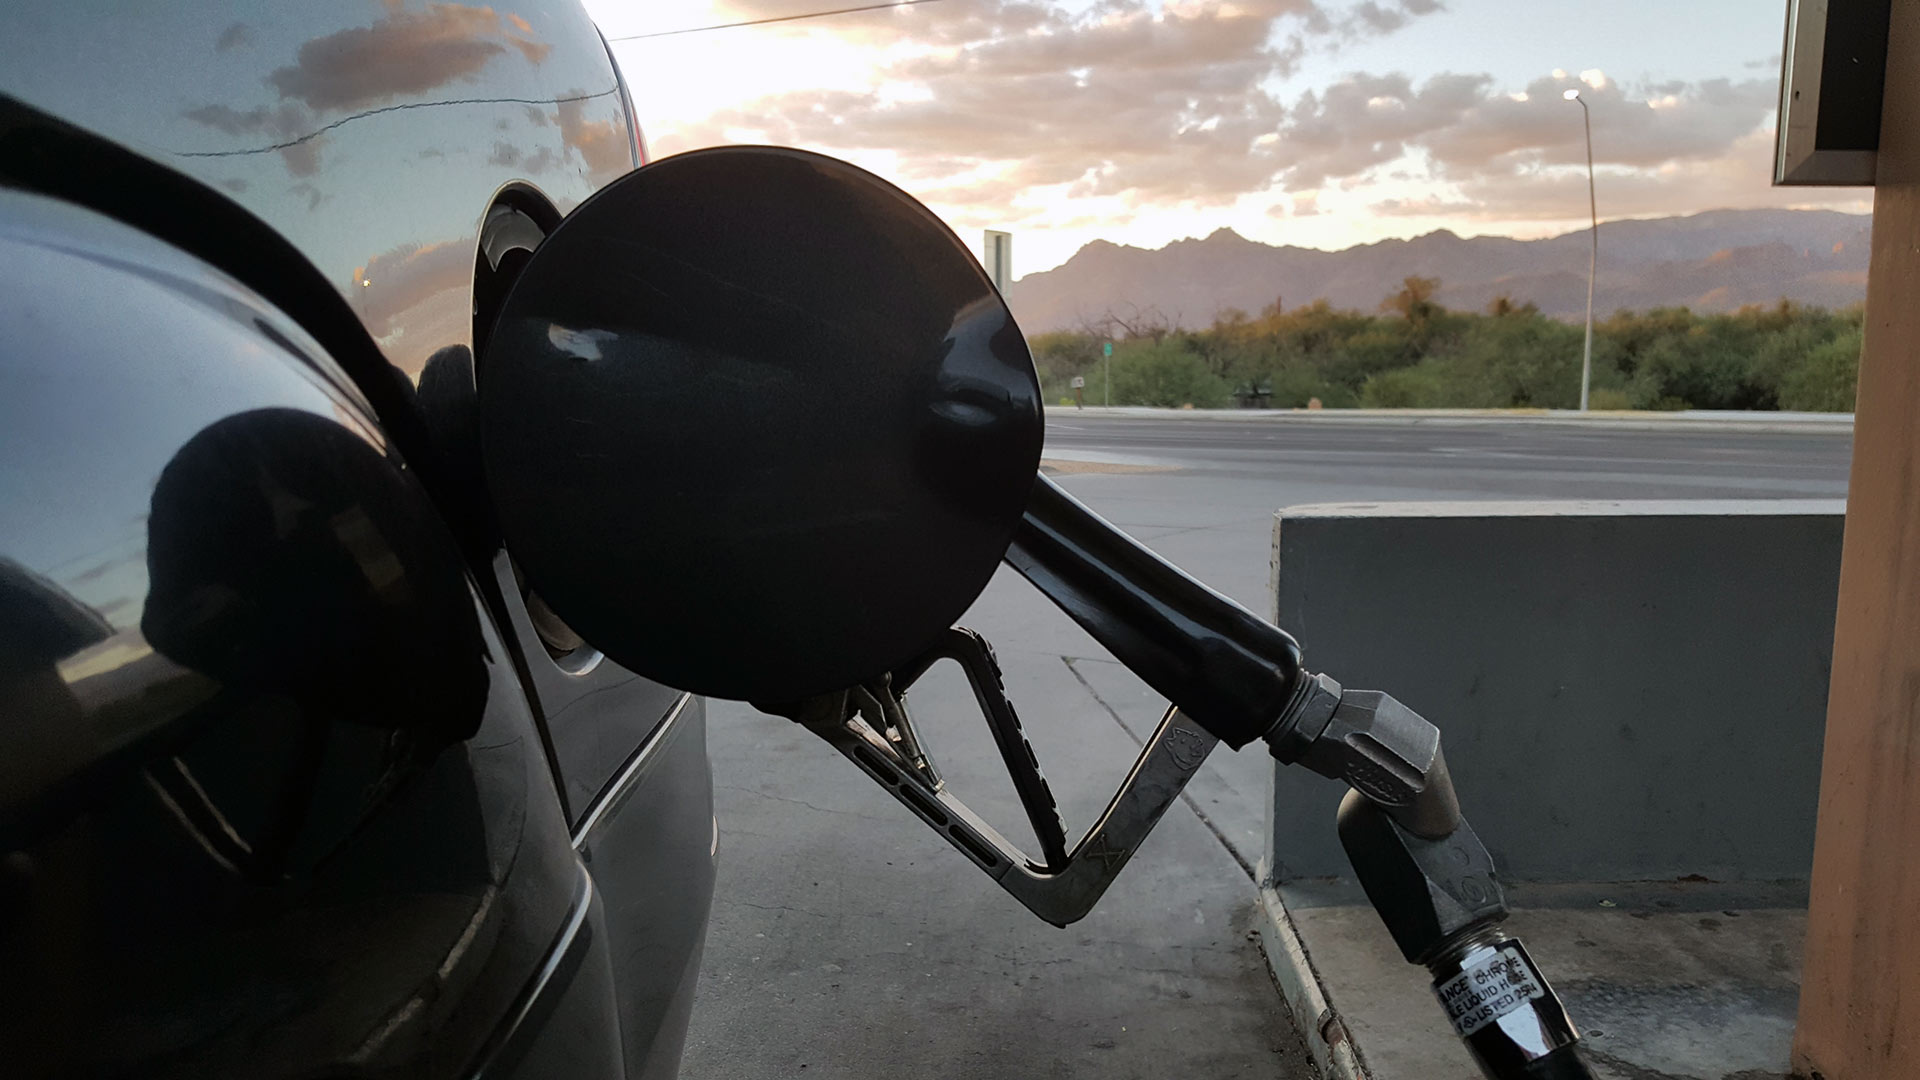 Pumping gas at a station on Tucson's east side.